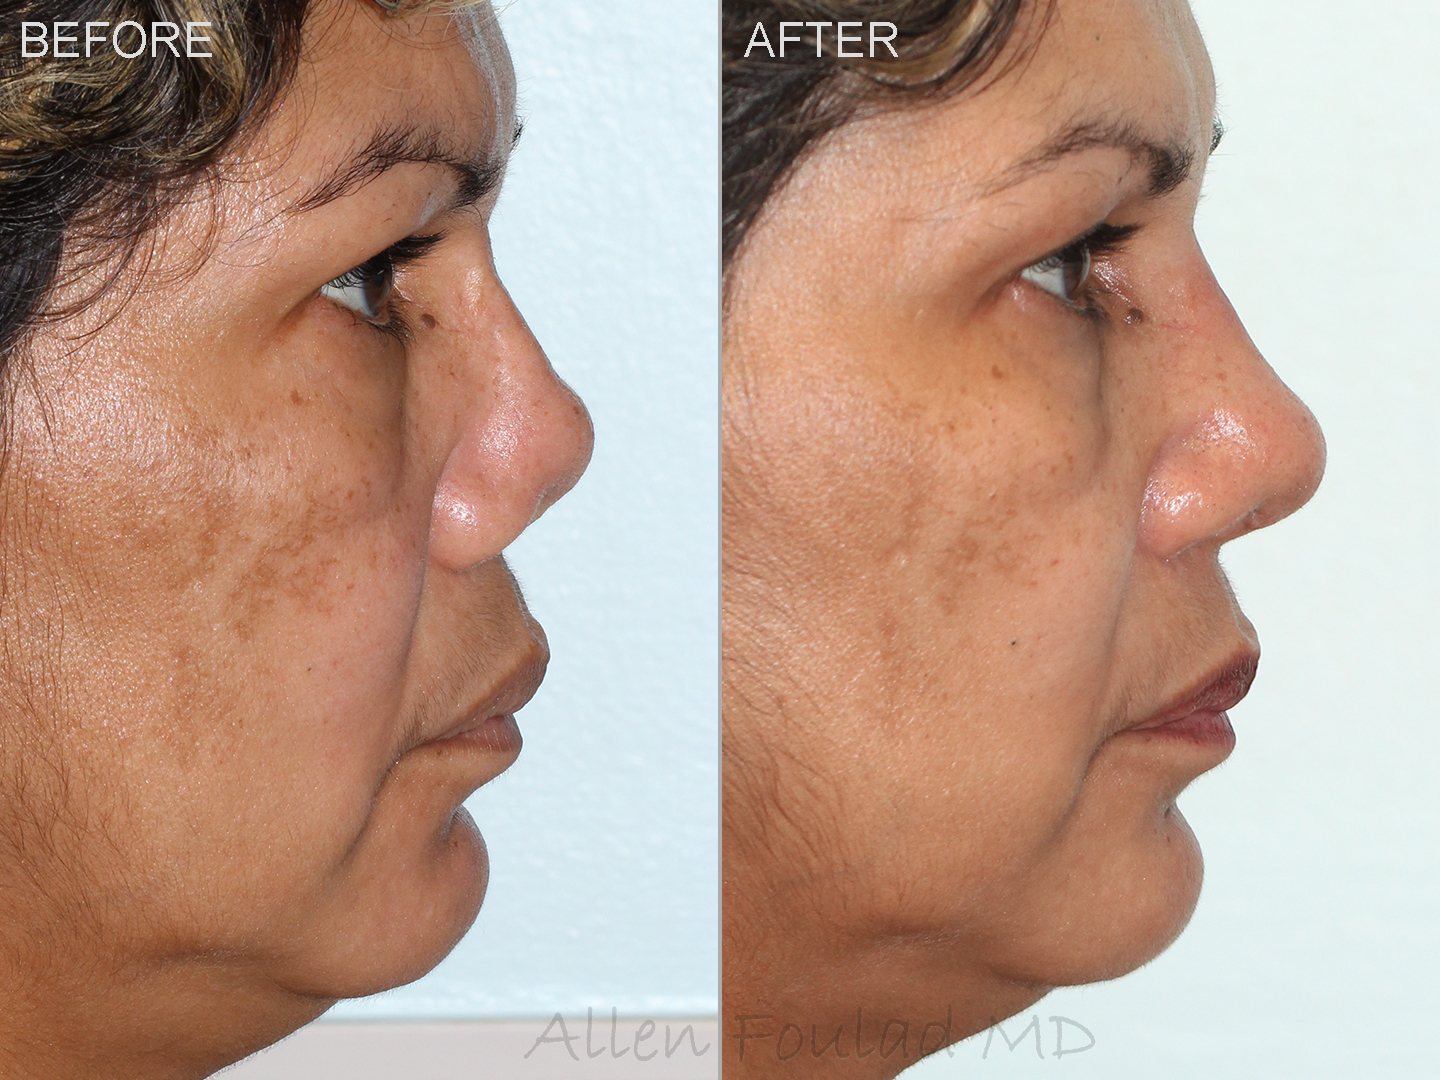 Before and after revision rhinoplasty using costal cartilage.